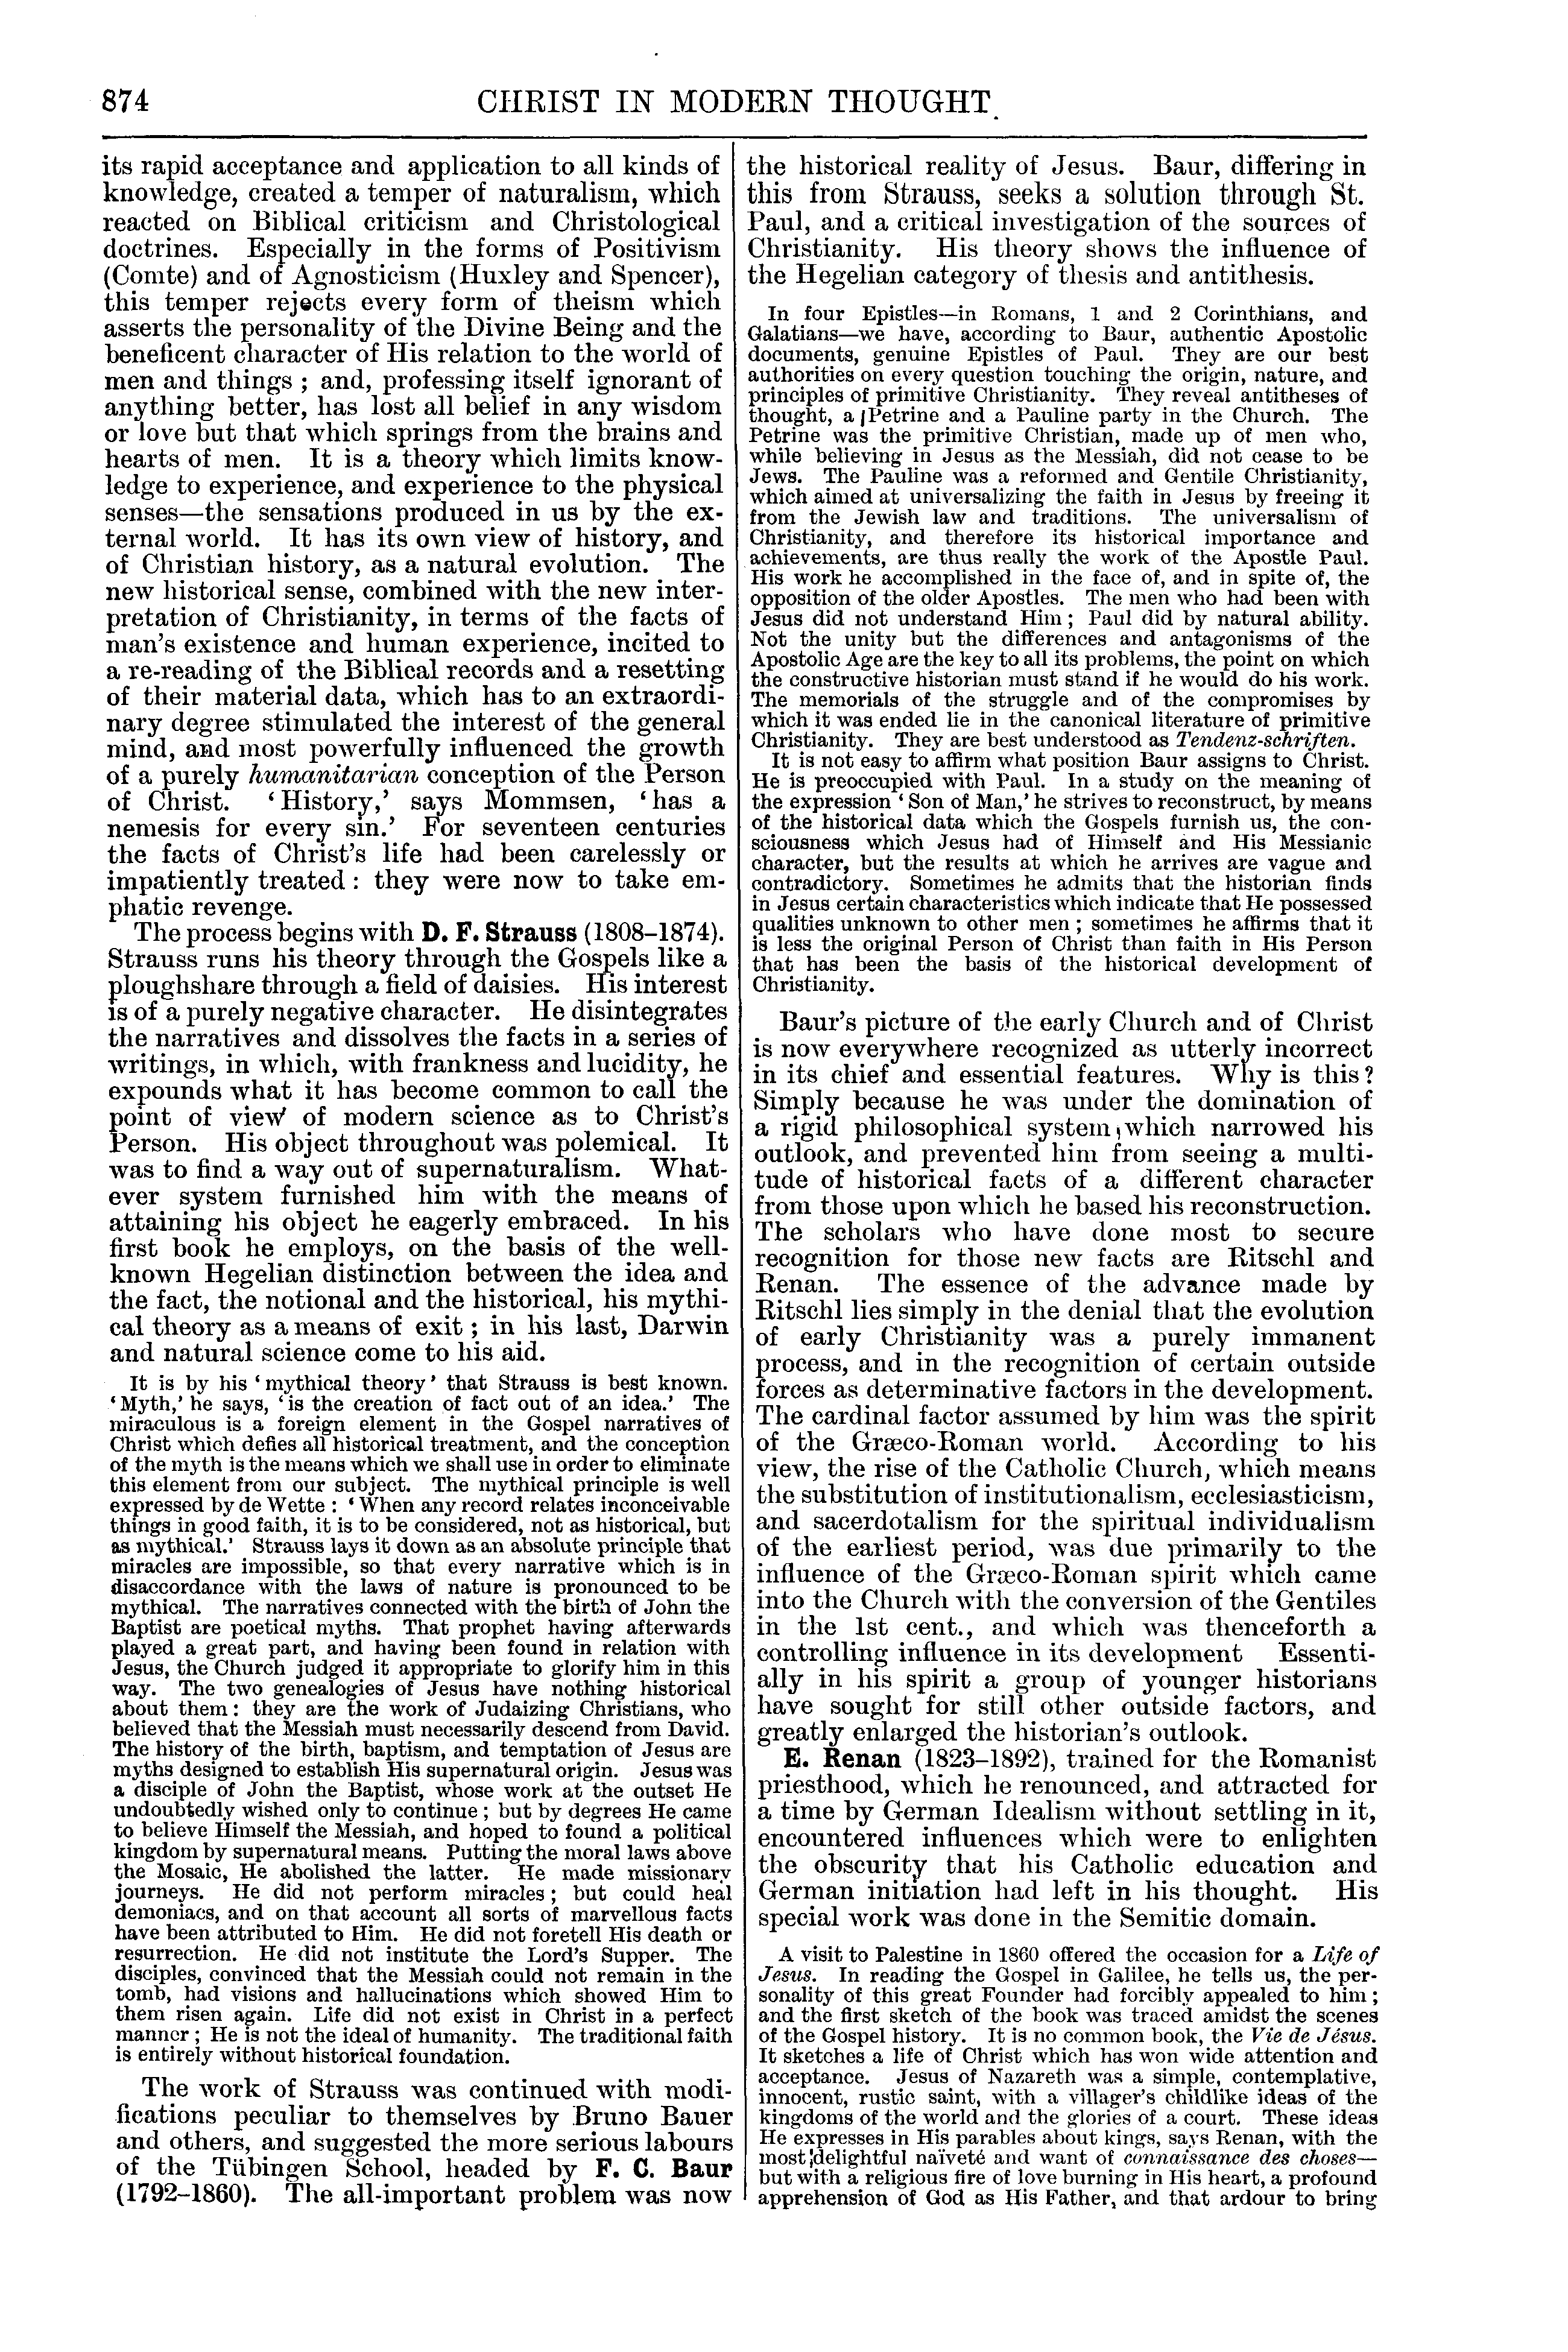 Image of page 874